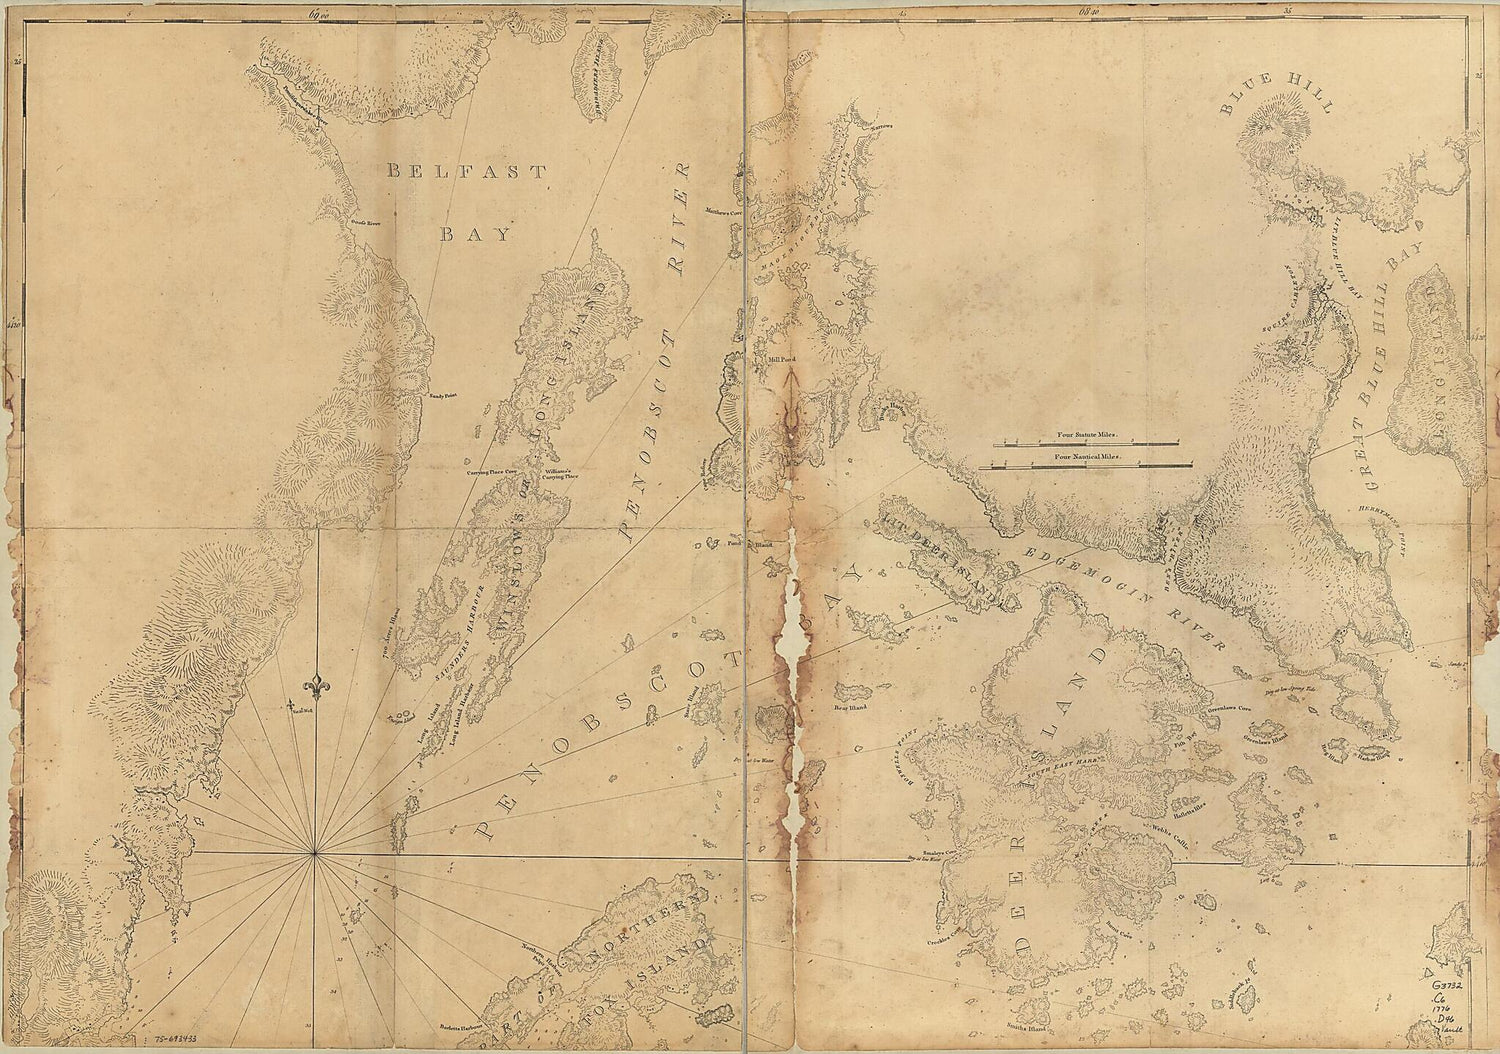 This old map of Coast of Maine Showing Blue Hill Bay, Penobscot Bay, Belfast Bay, Islesboro Island, Deer Island, and Other Islands from 1776 was created by Joseph F. W. (Joseph Frederick Wallet) Des Barres in 1776